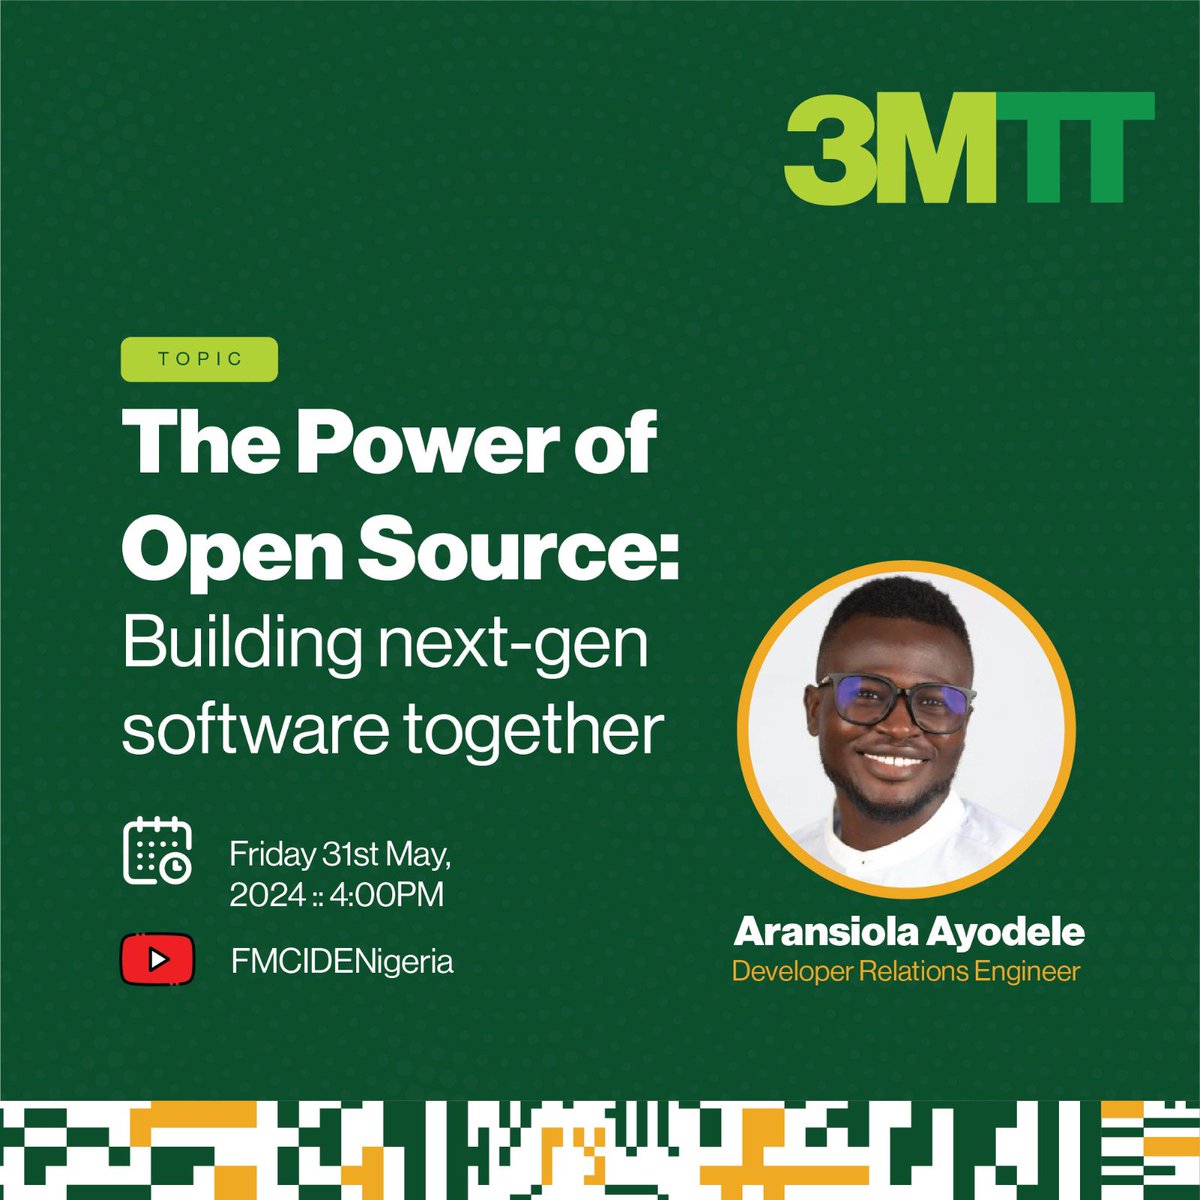 Are you interested in The Power of Open Source? Join us today at 4:00 pm for our webinar on 'Building next-gen software together.' 

🔗: b.link/3MTTPwrOpnSrc

Don't miss this opportunity to learn and collaborate on cutting-edge projects. See you later! 

#My3MTT #3MTTWebinar